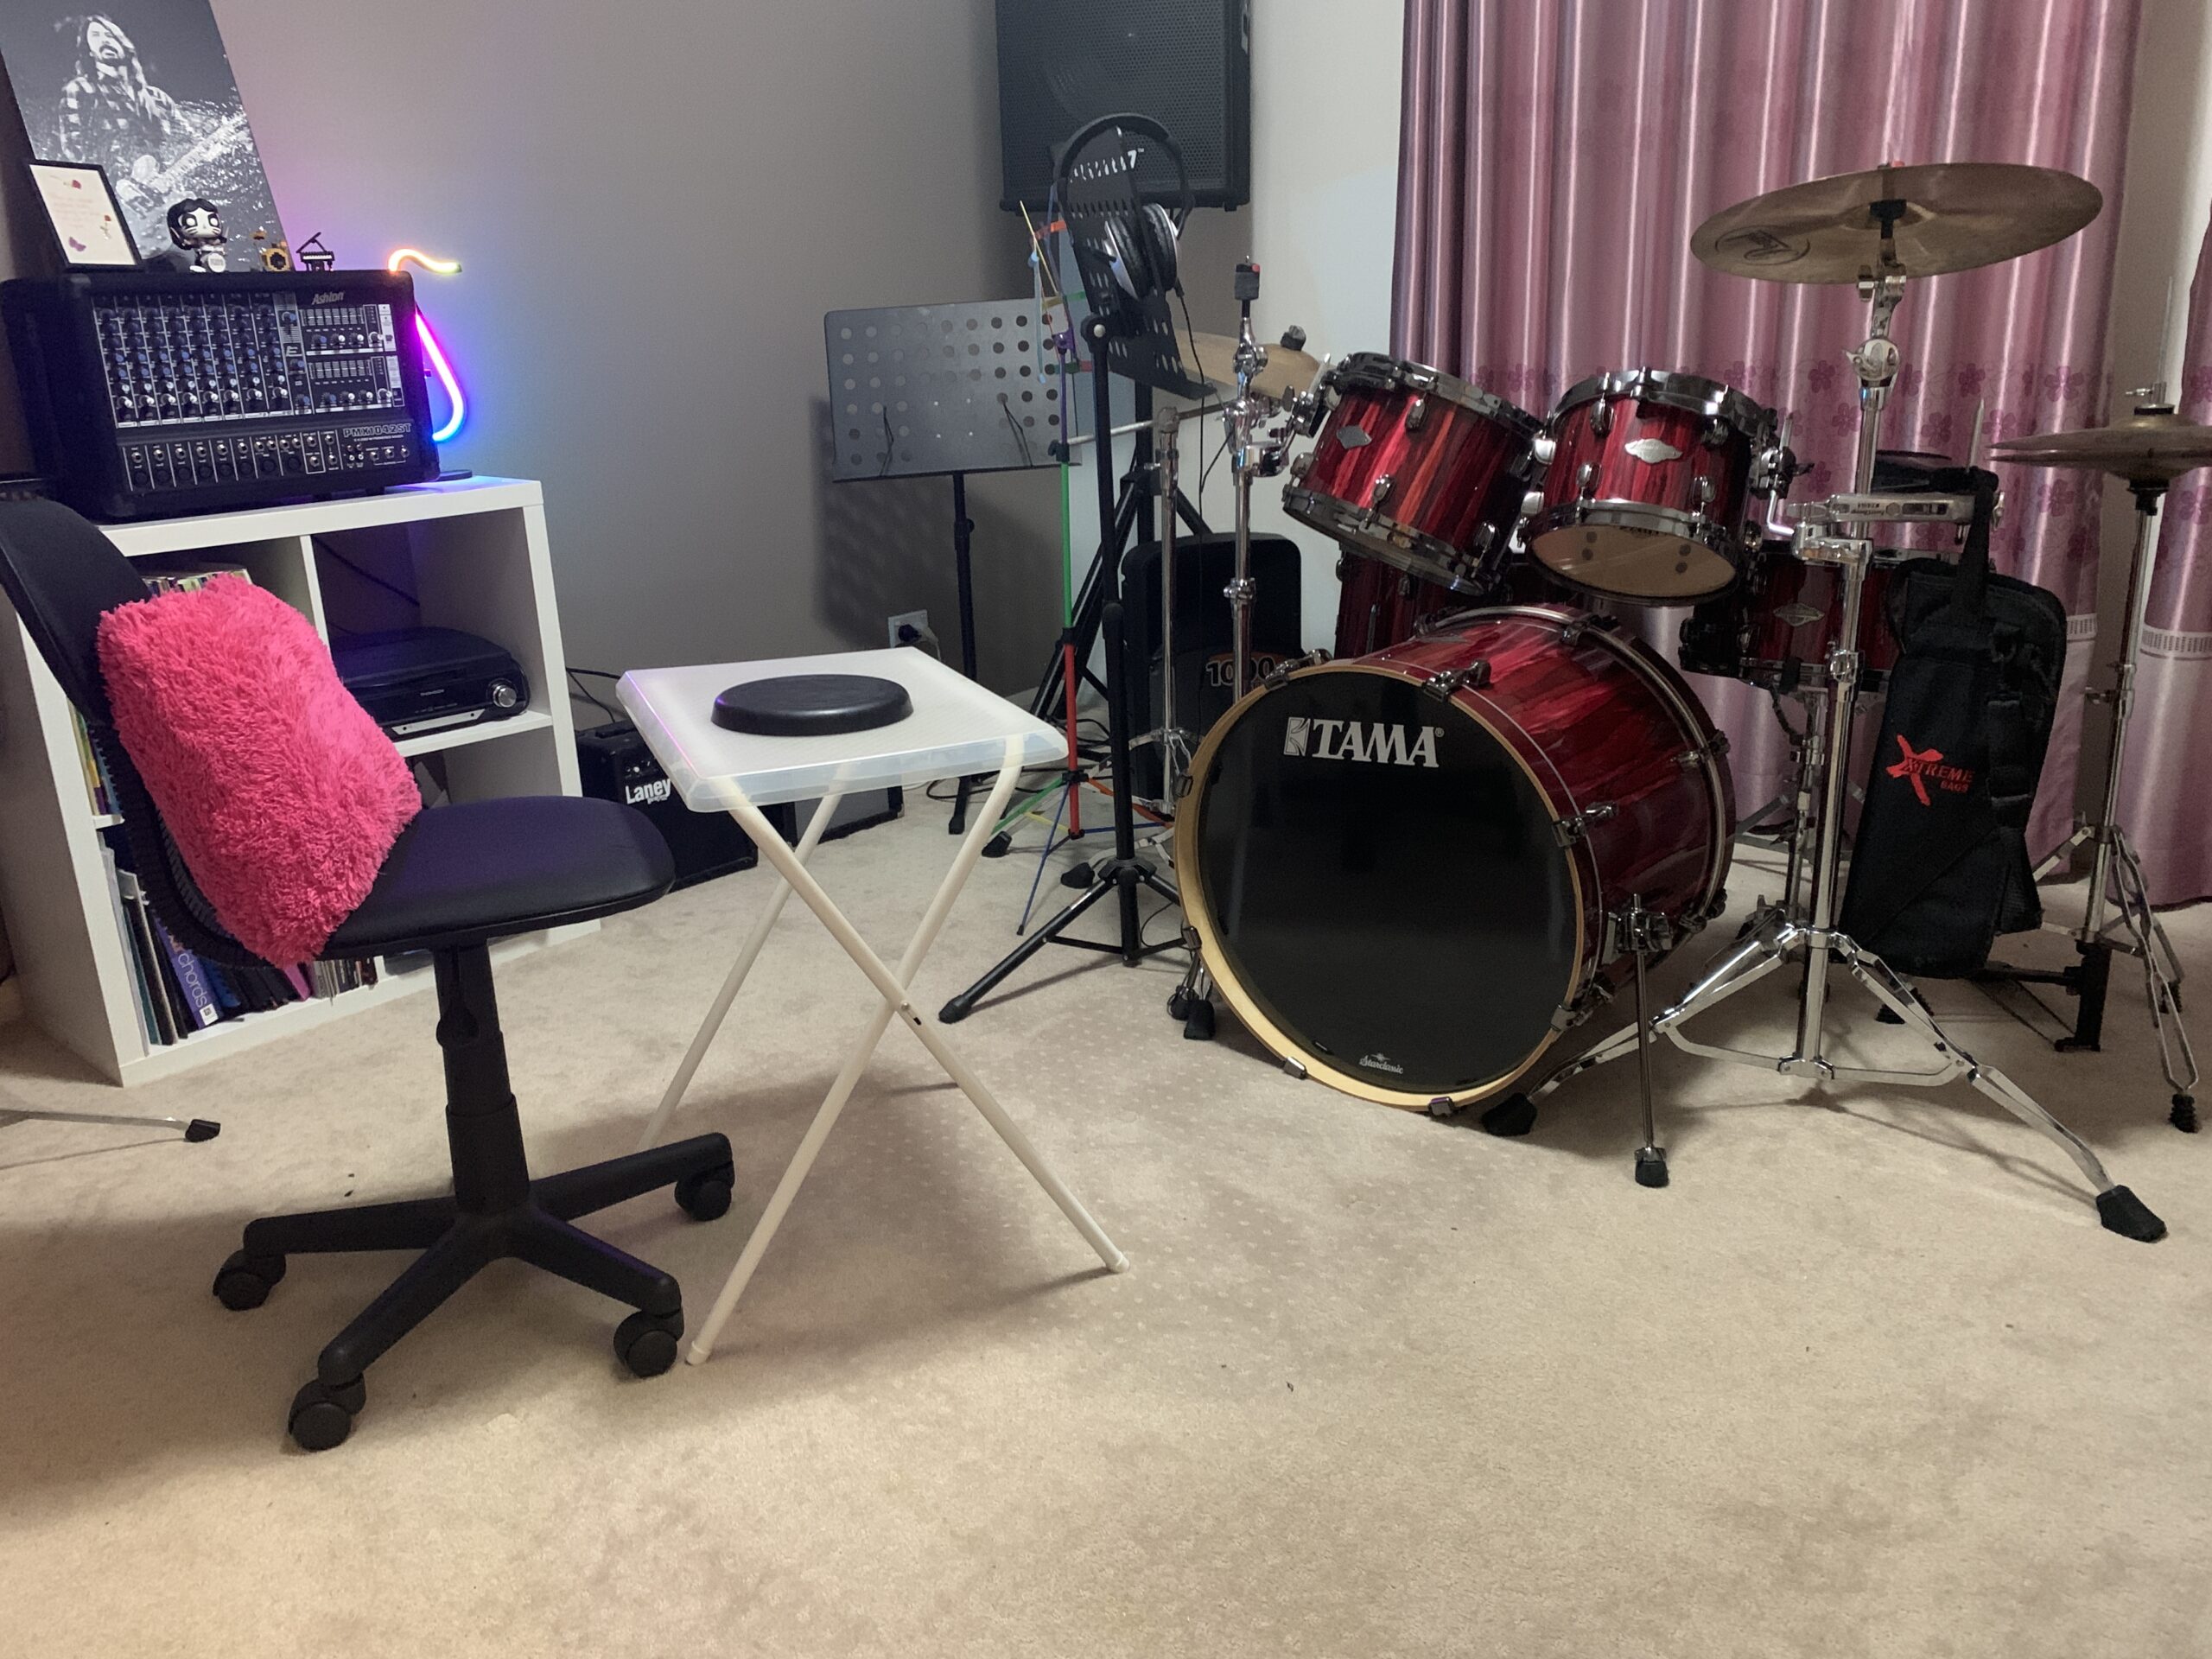 Drum lessons in Ariana's studio in Canning Vale